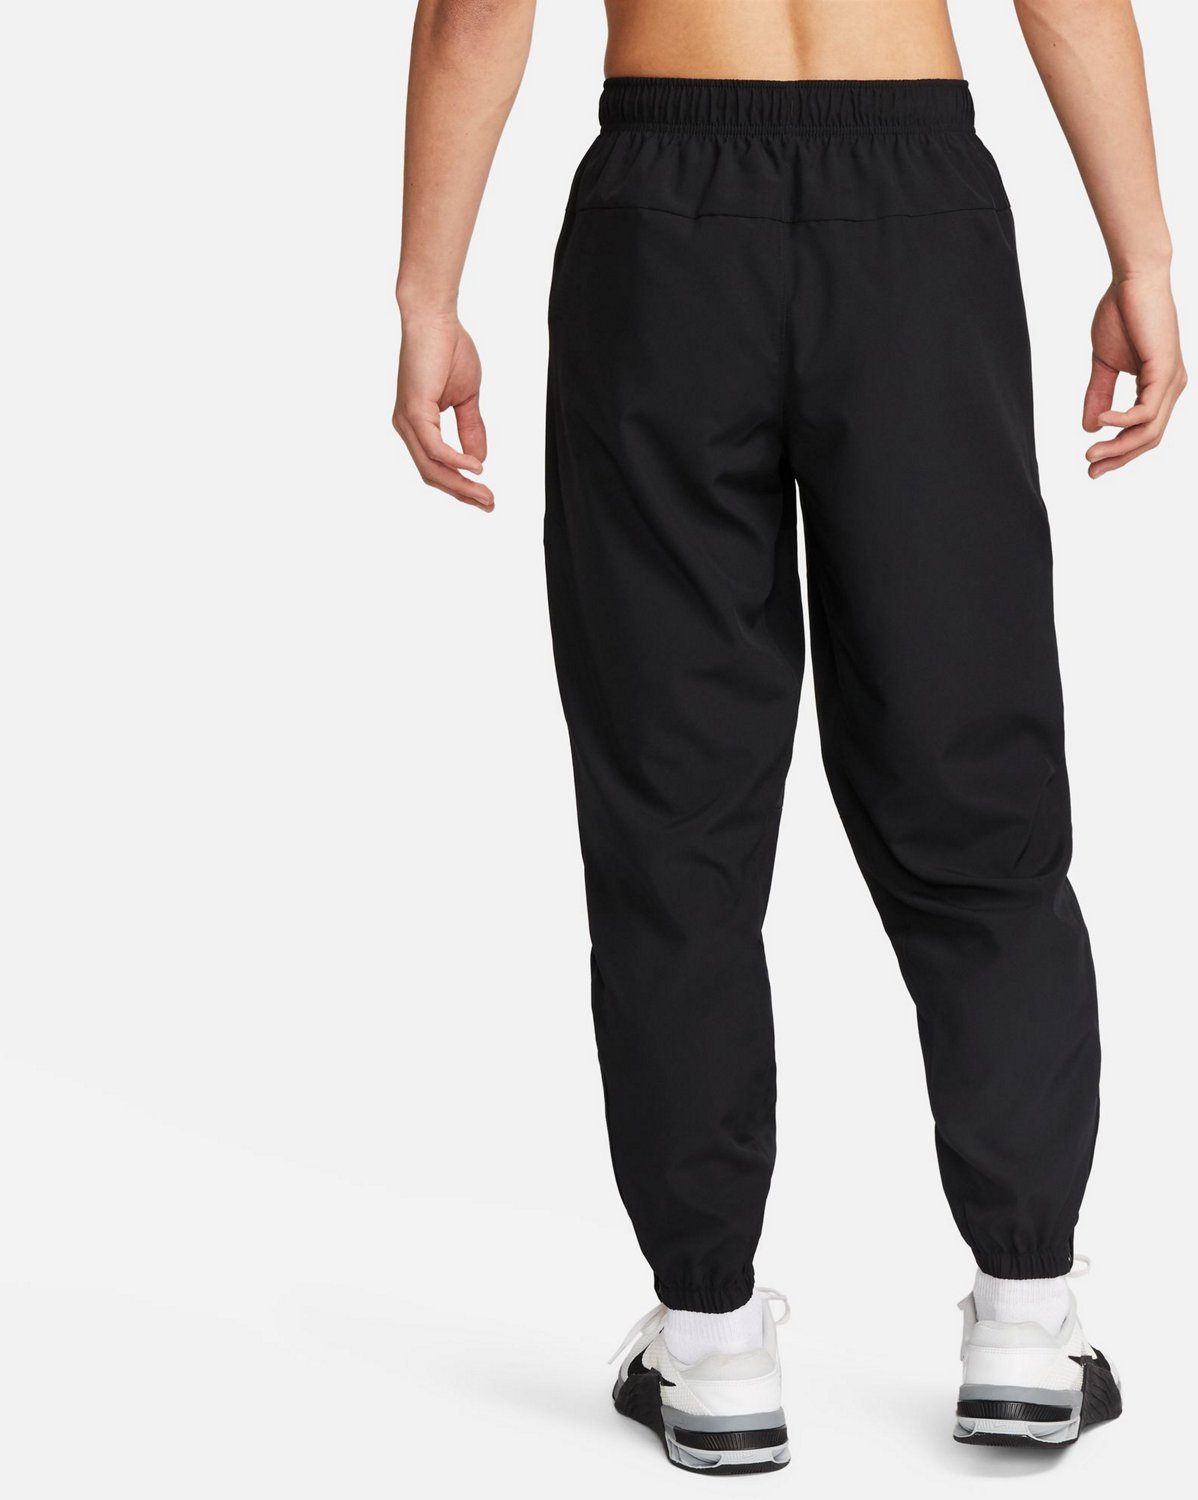 Nike Men's Fitness Taper Pants | Free Shipping at Academy